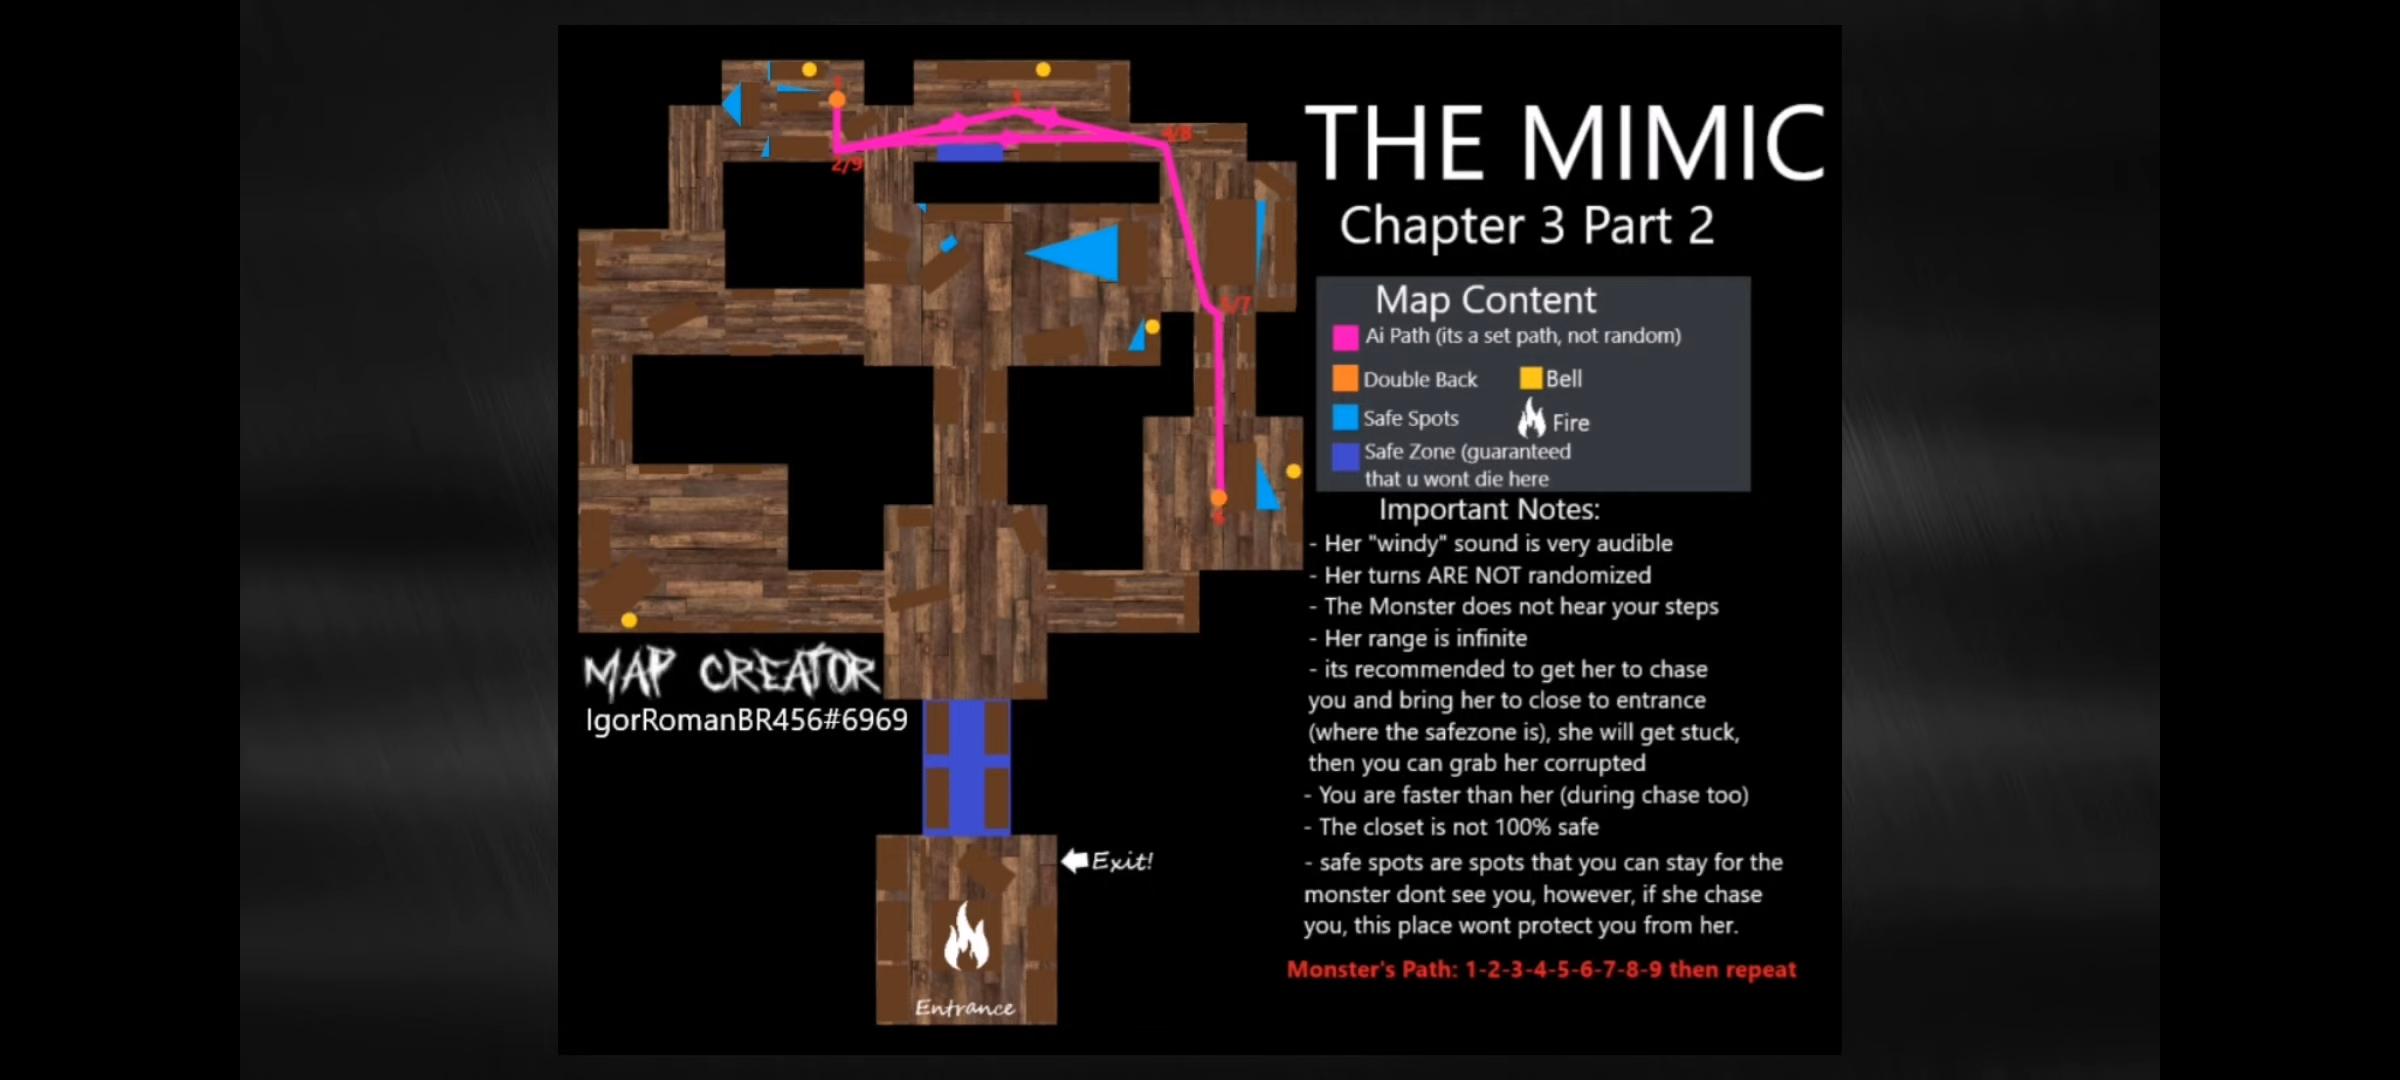 The Mimic Roblox: Characters, Maps & More - BrightChamps Blog